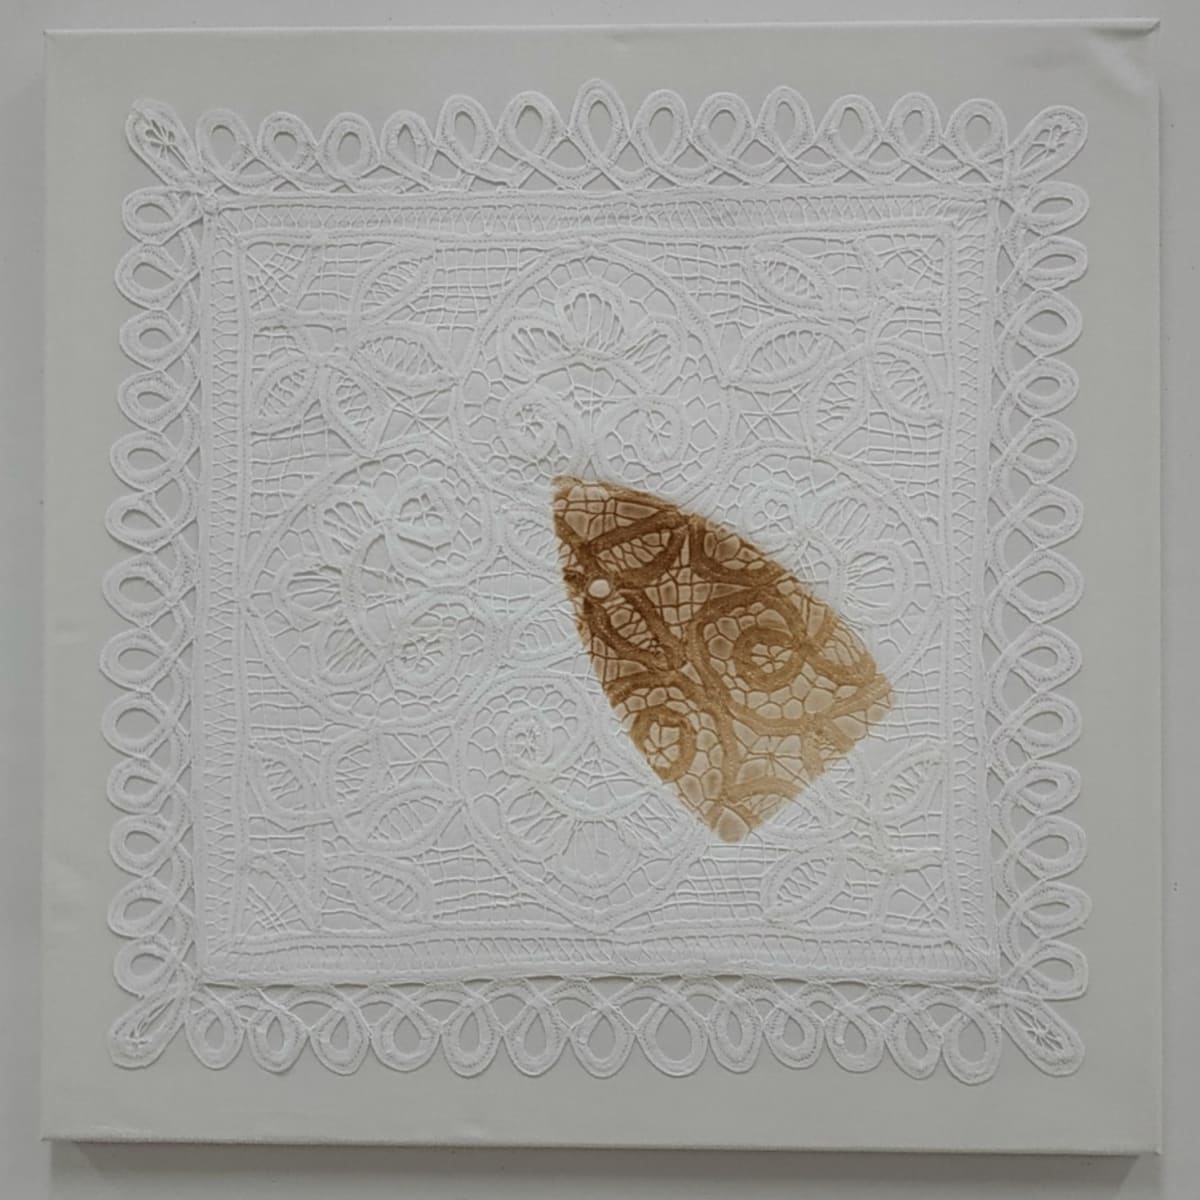 Scorch: Distracted by Lesley Turner  Image: Lesley Turner, 'Scorch: Distracted', 2020, 22"x22". Cotton pillow case, bedsheet, polyester thread. To deliberately scorch the cloth is a passive-aggressive act on behalf of the launderer.